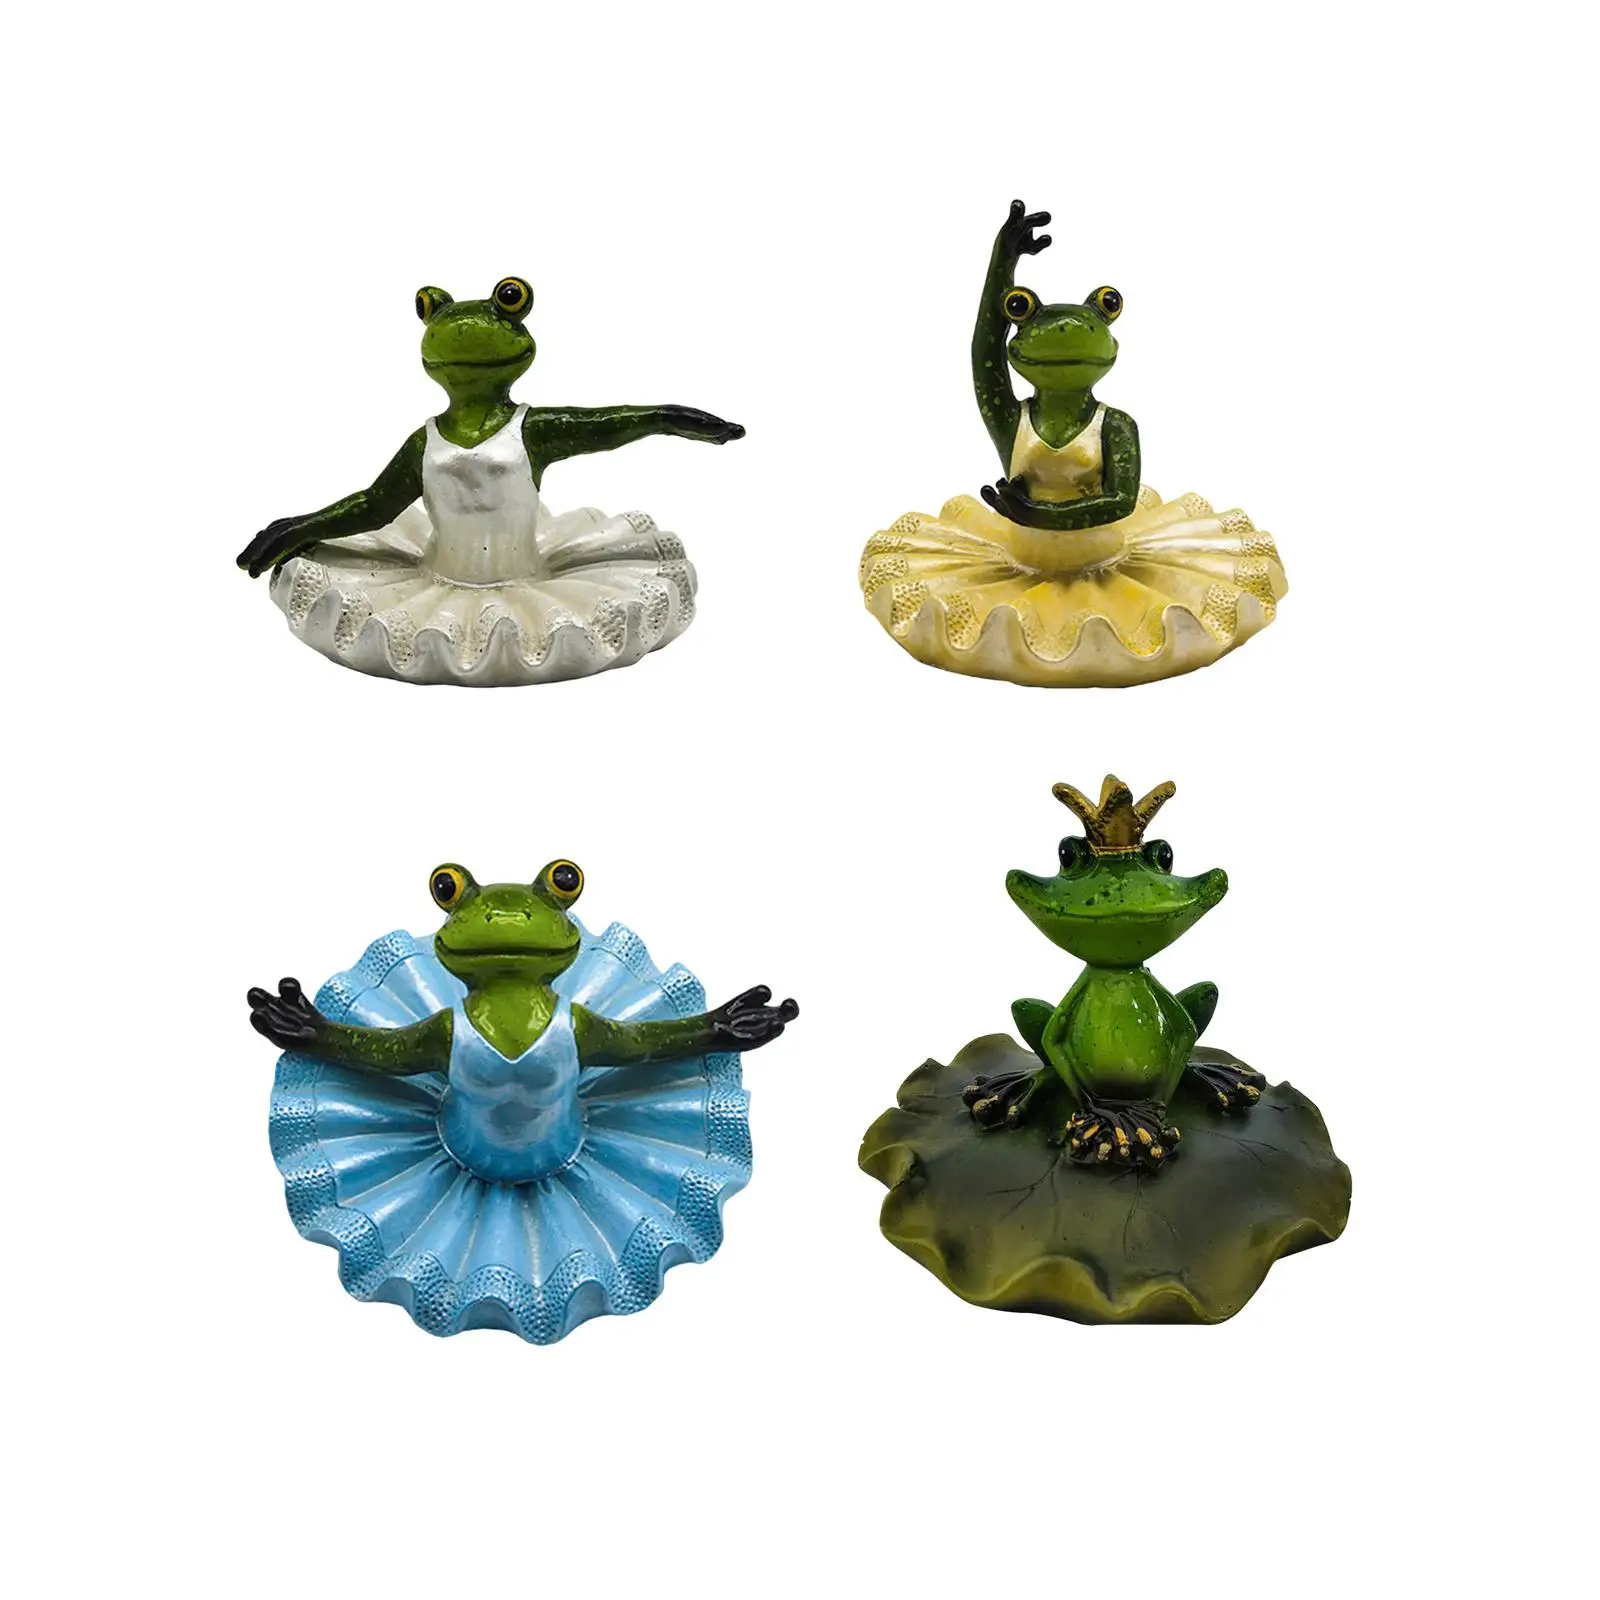 

Frog Statues Garden Pond Decor Cute Frog Sculpture Water Floating Frog Ornament for Desk Fish Tank Landscaping Accessories